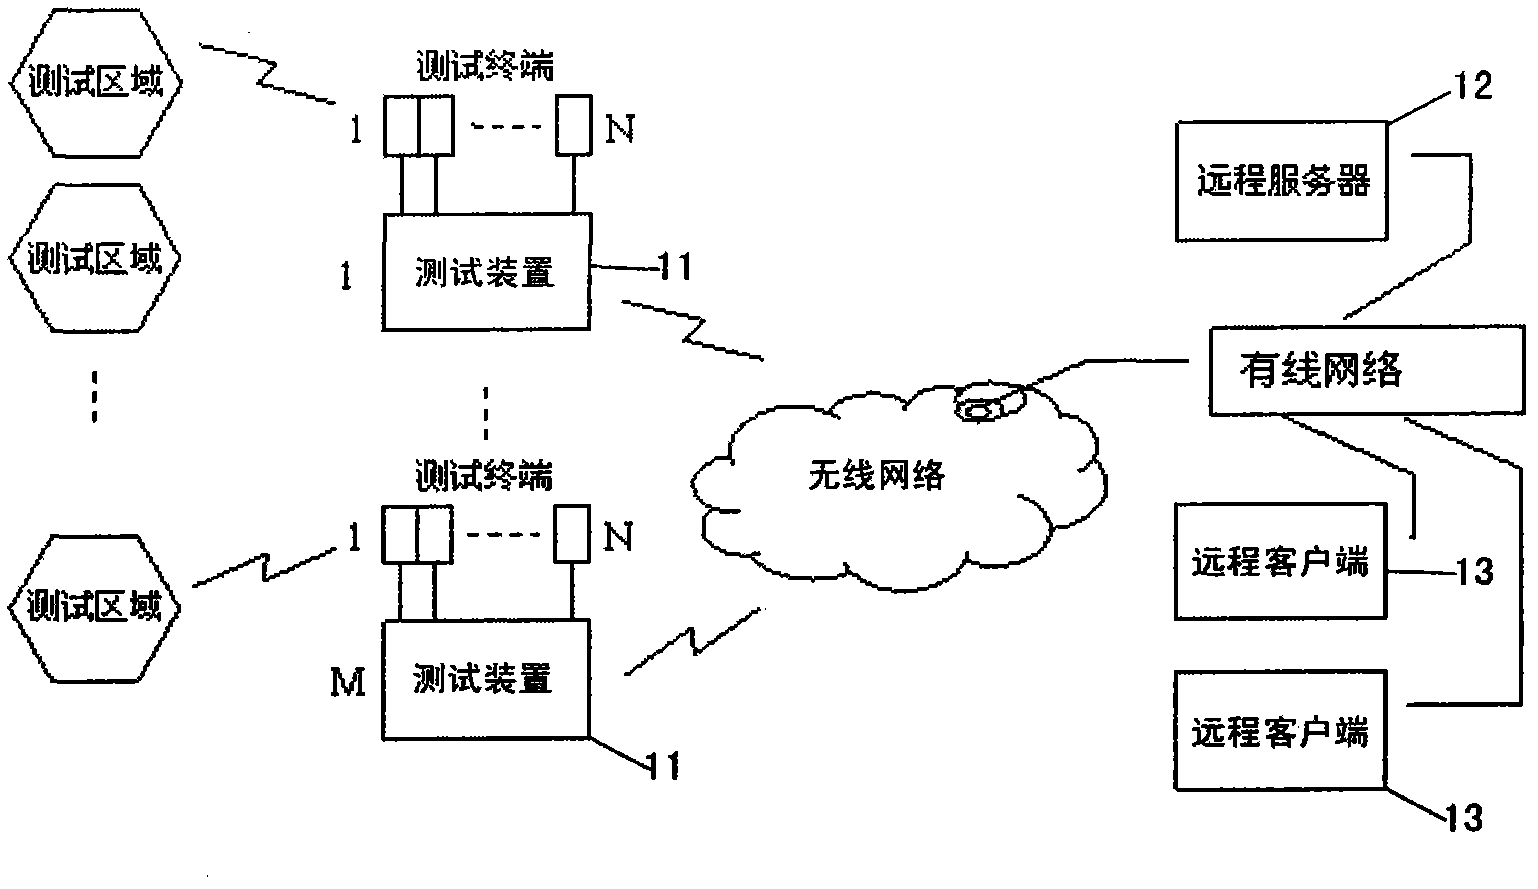 Performance testing device, system and testing method for mobile communication system